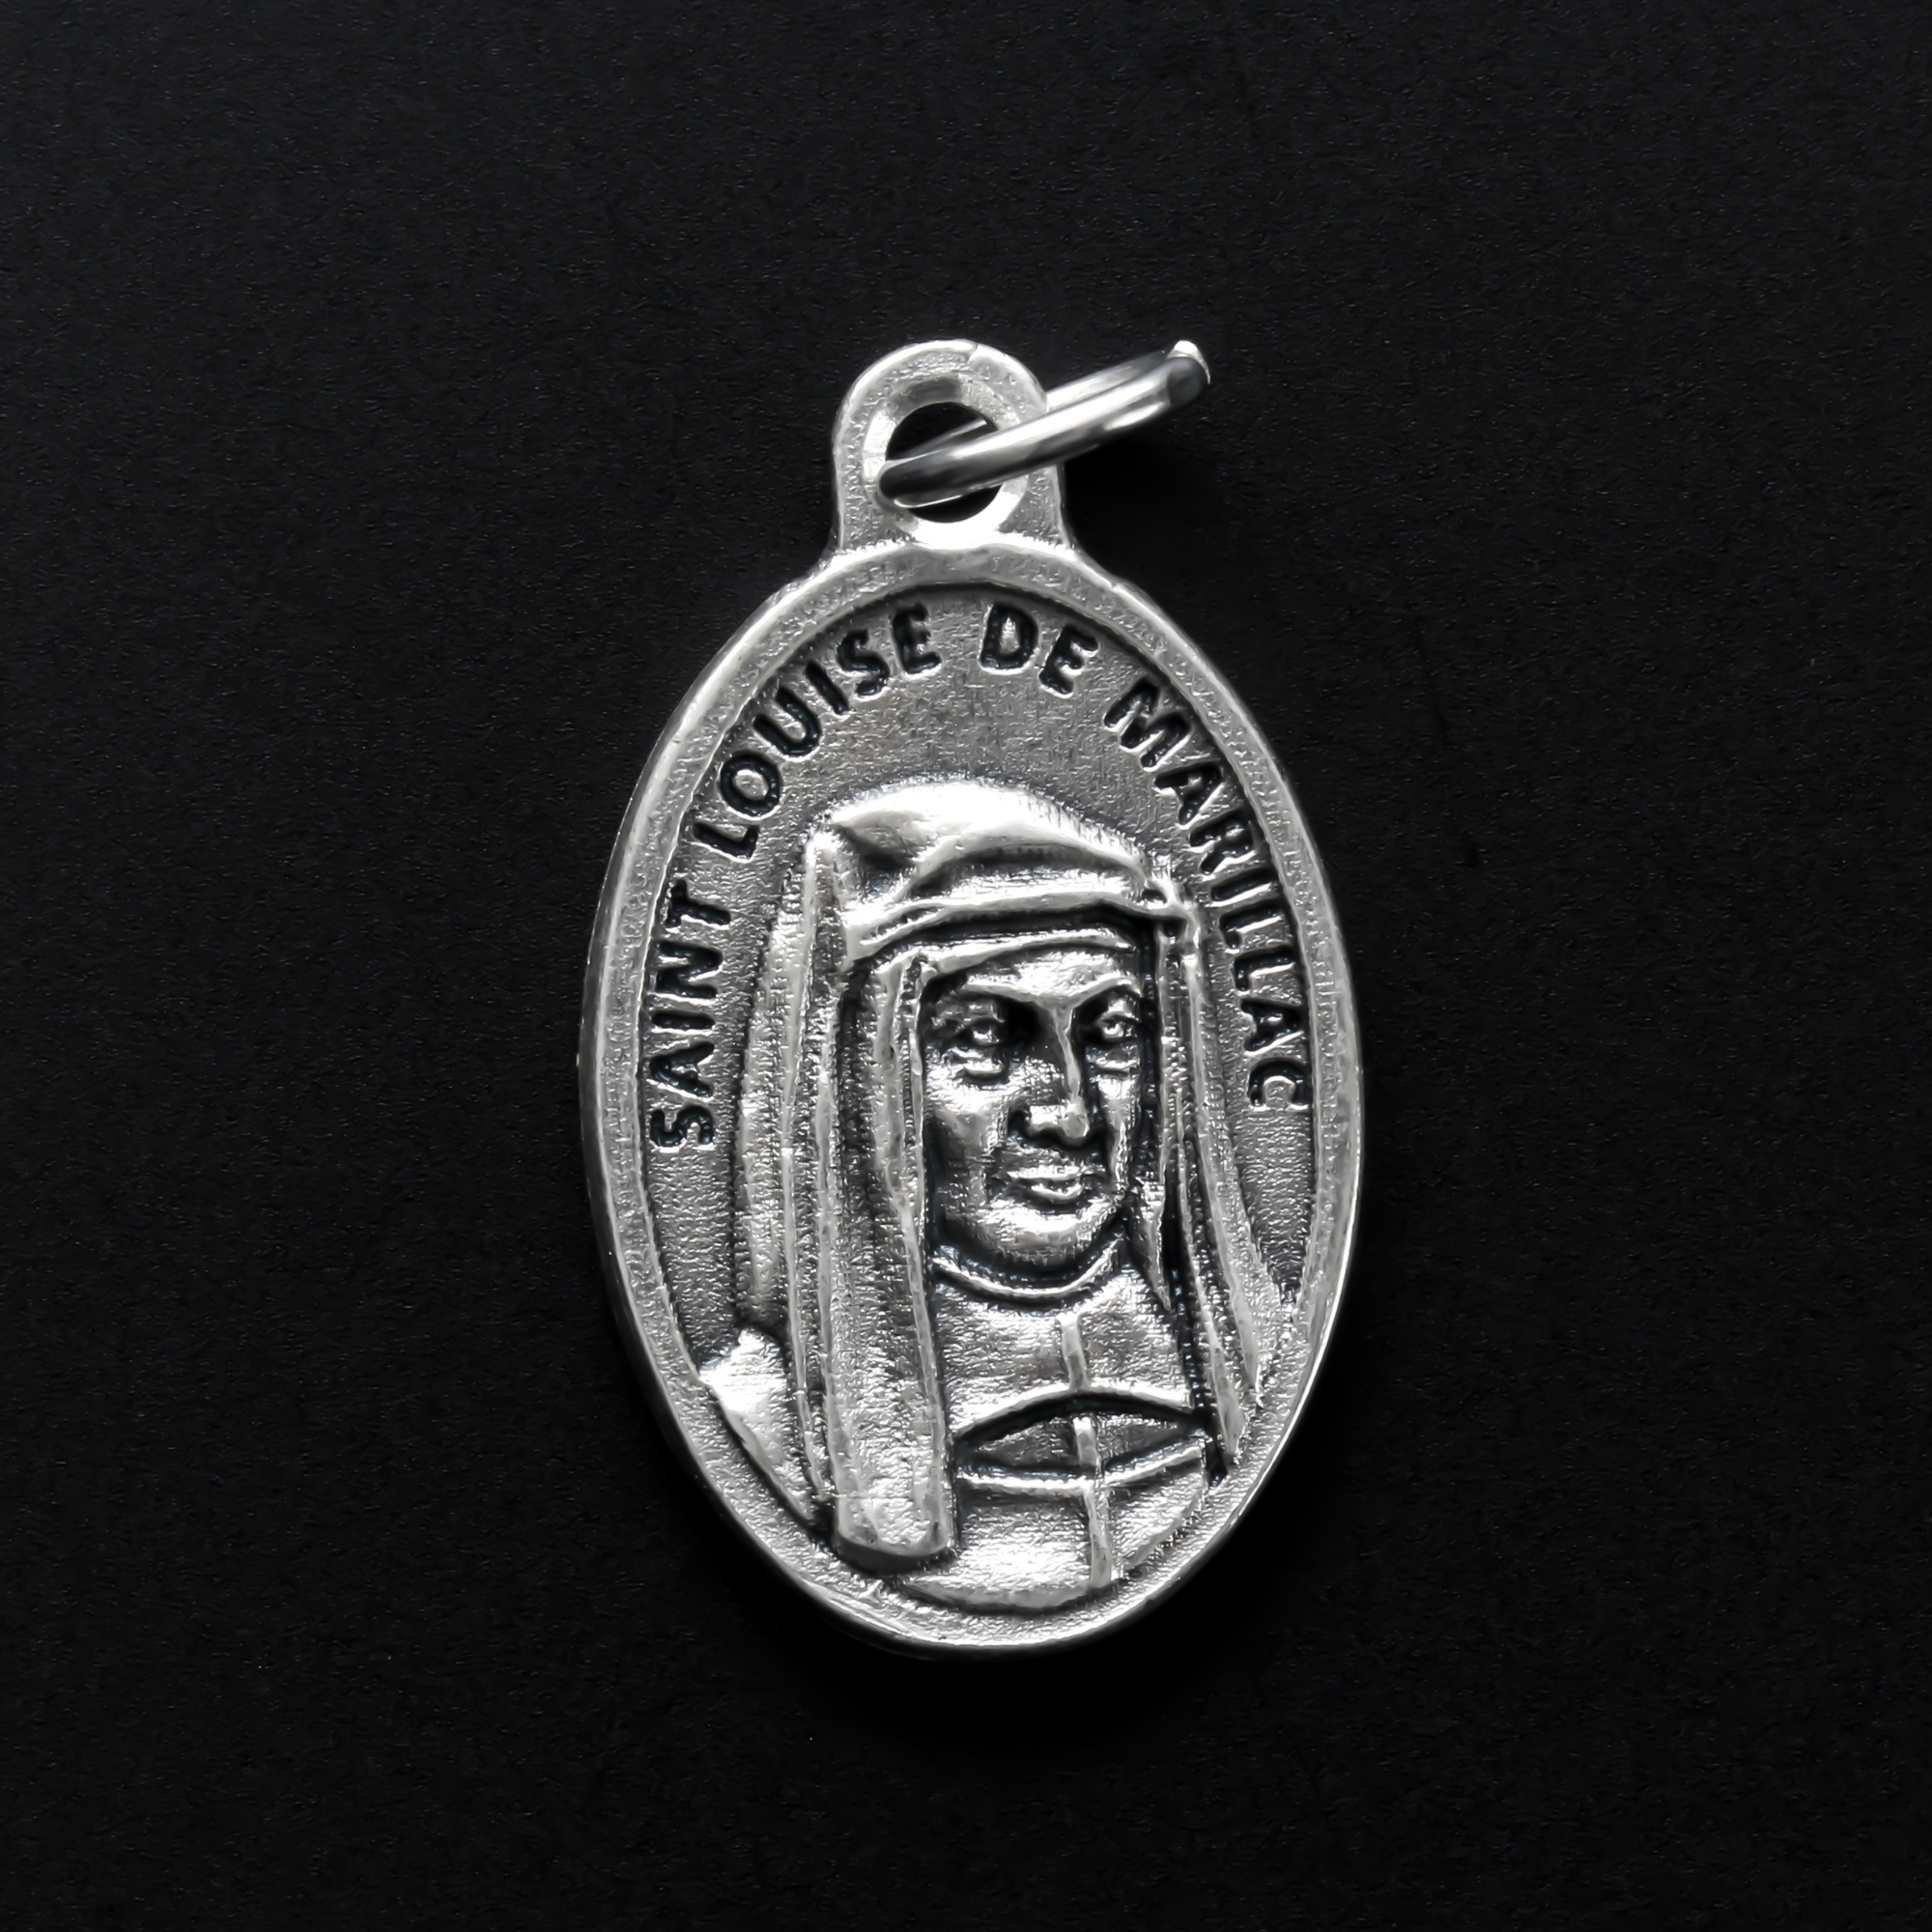 Saint Louise de Marillac medal that depicts the saint on the front and is marked "Pray For Us" on the back.